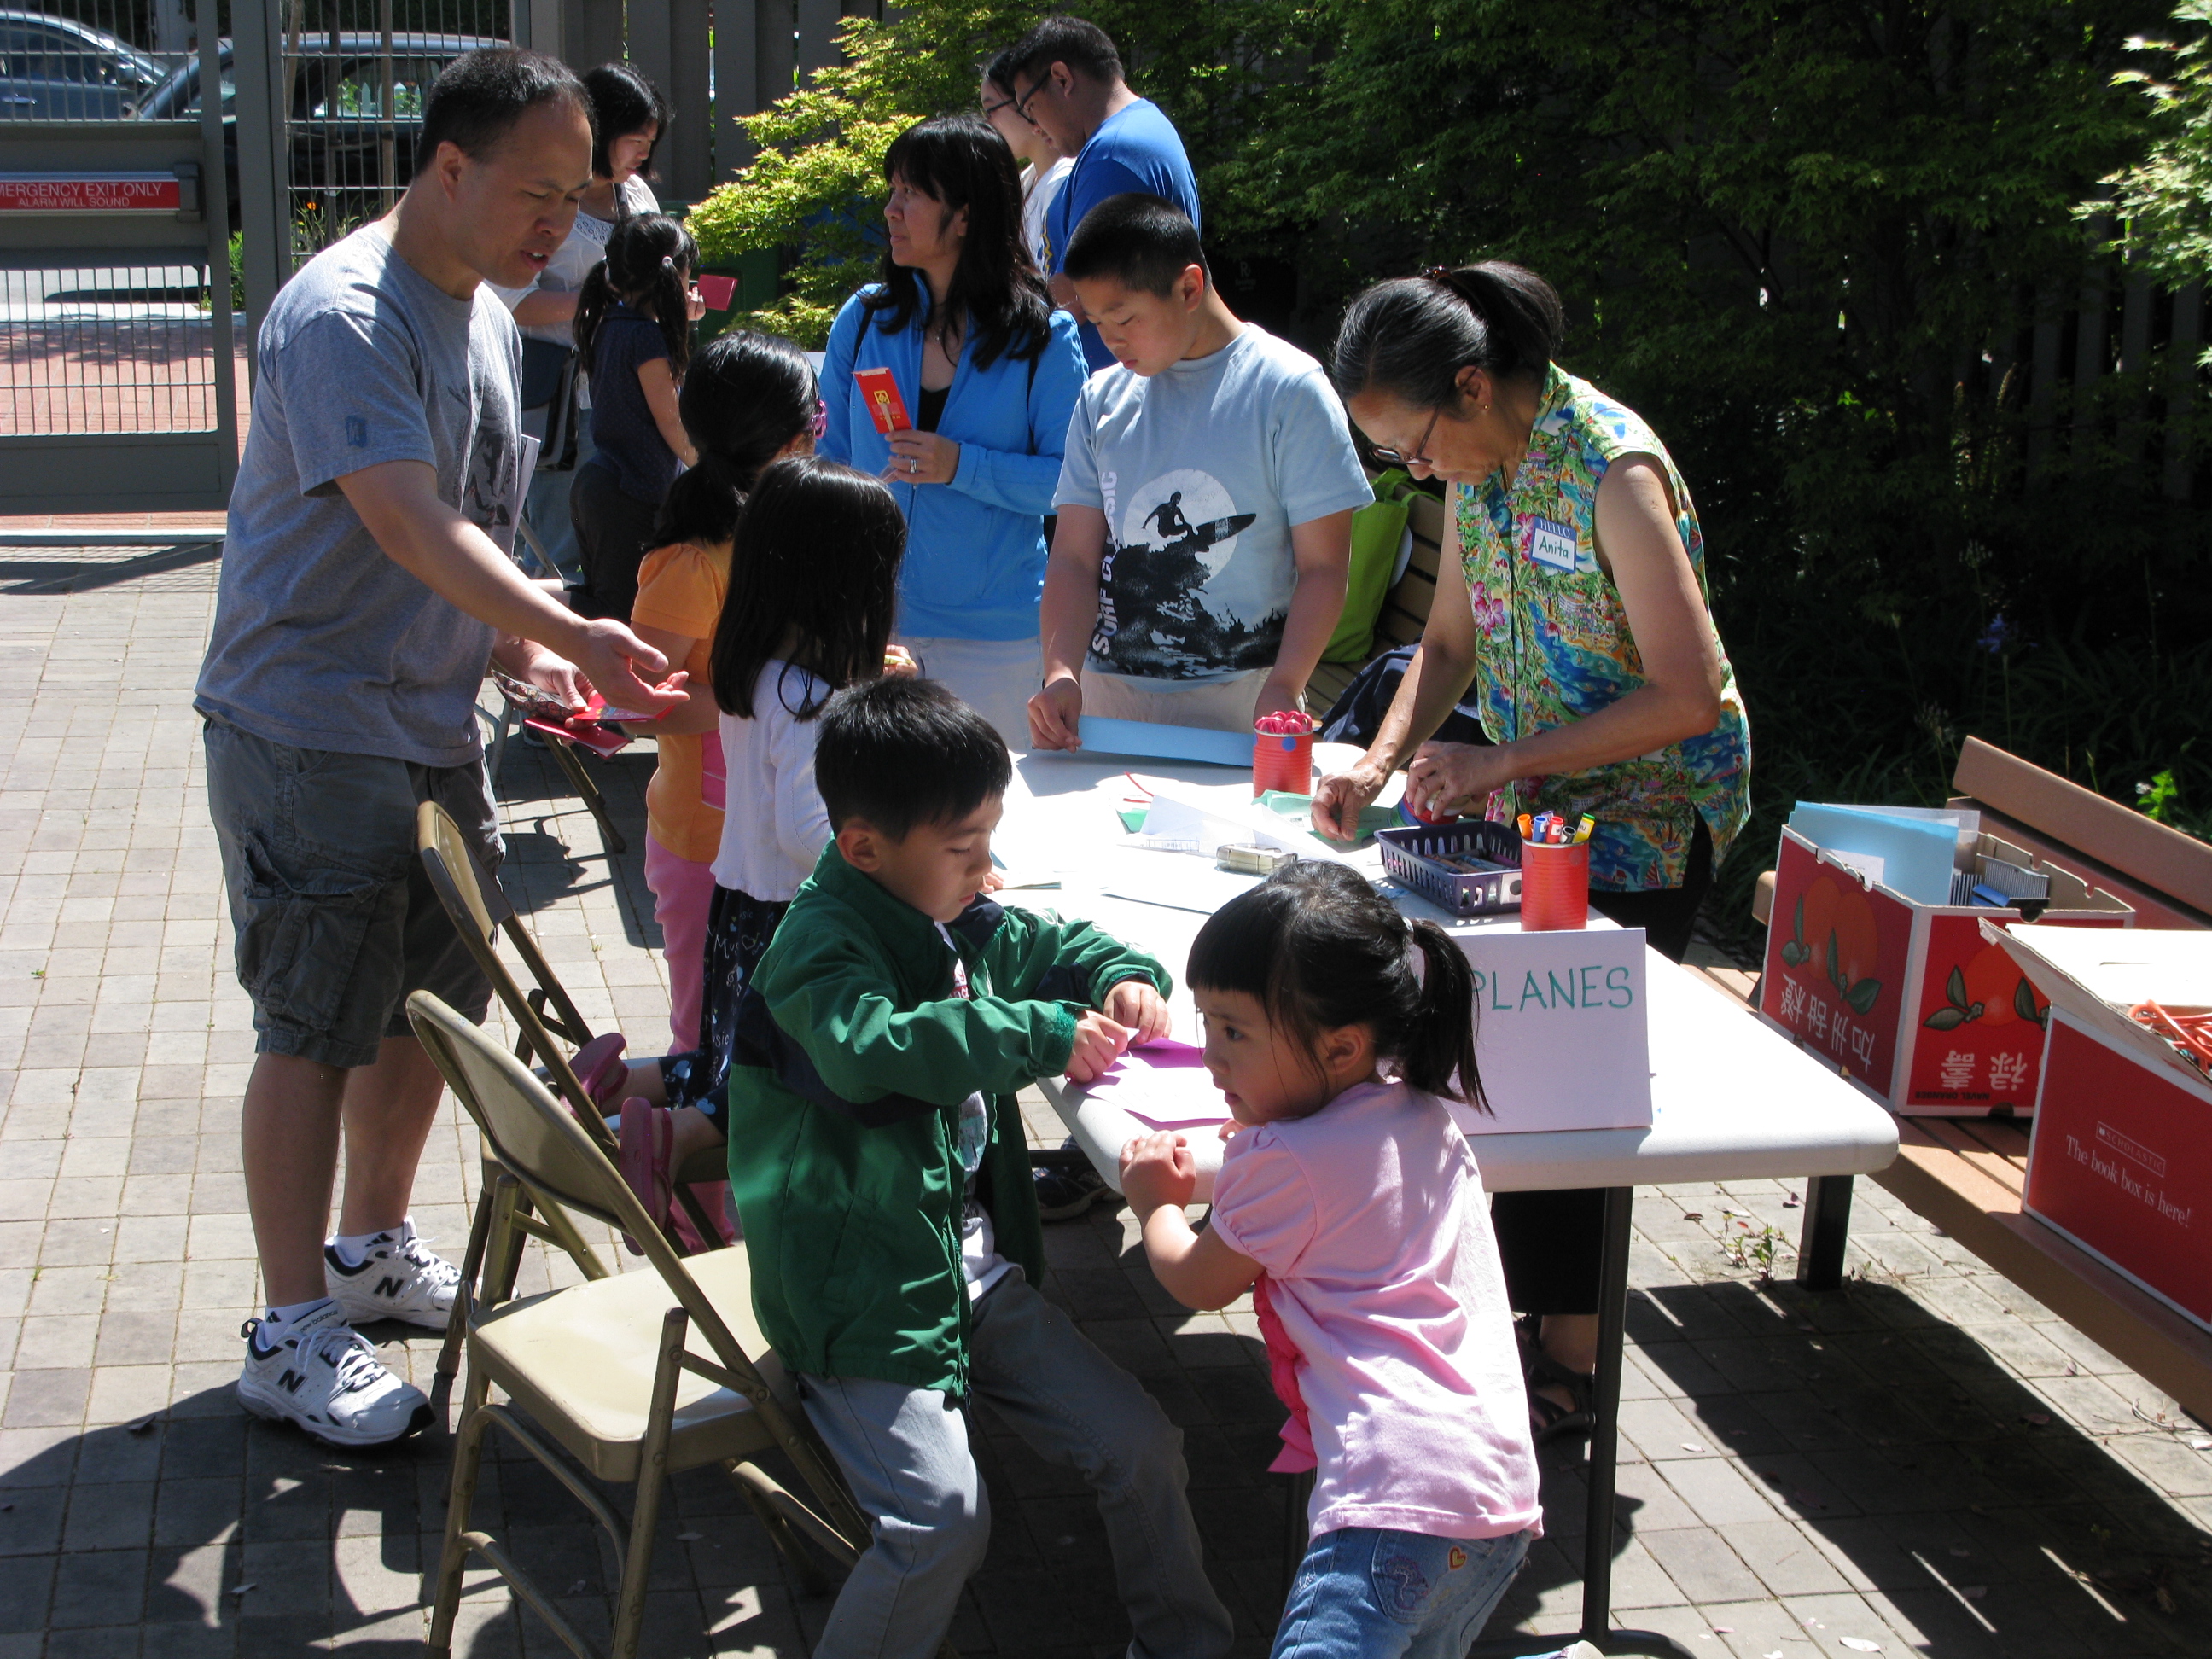 Children, parents and staff at an activity table outside